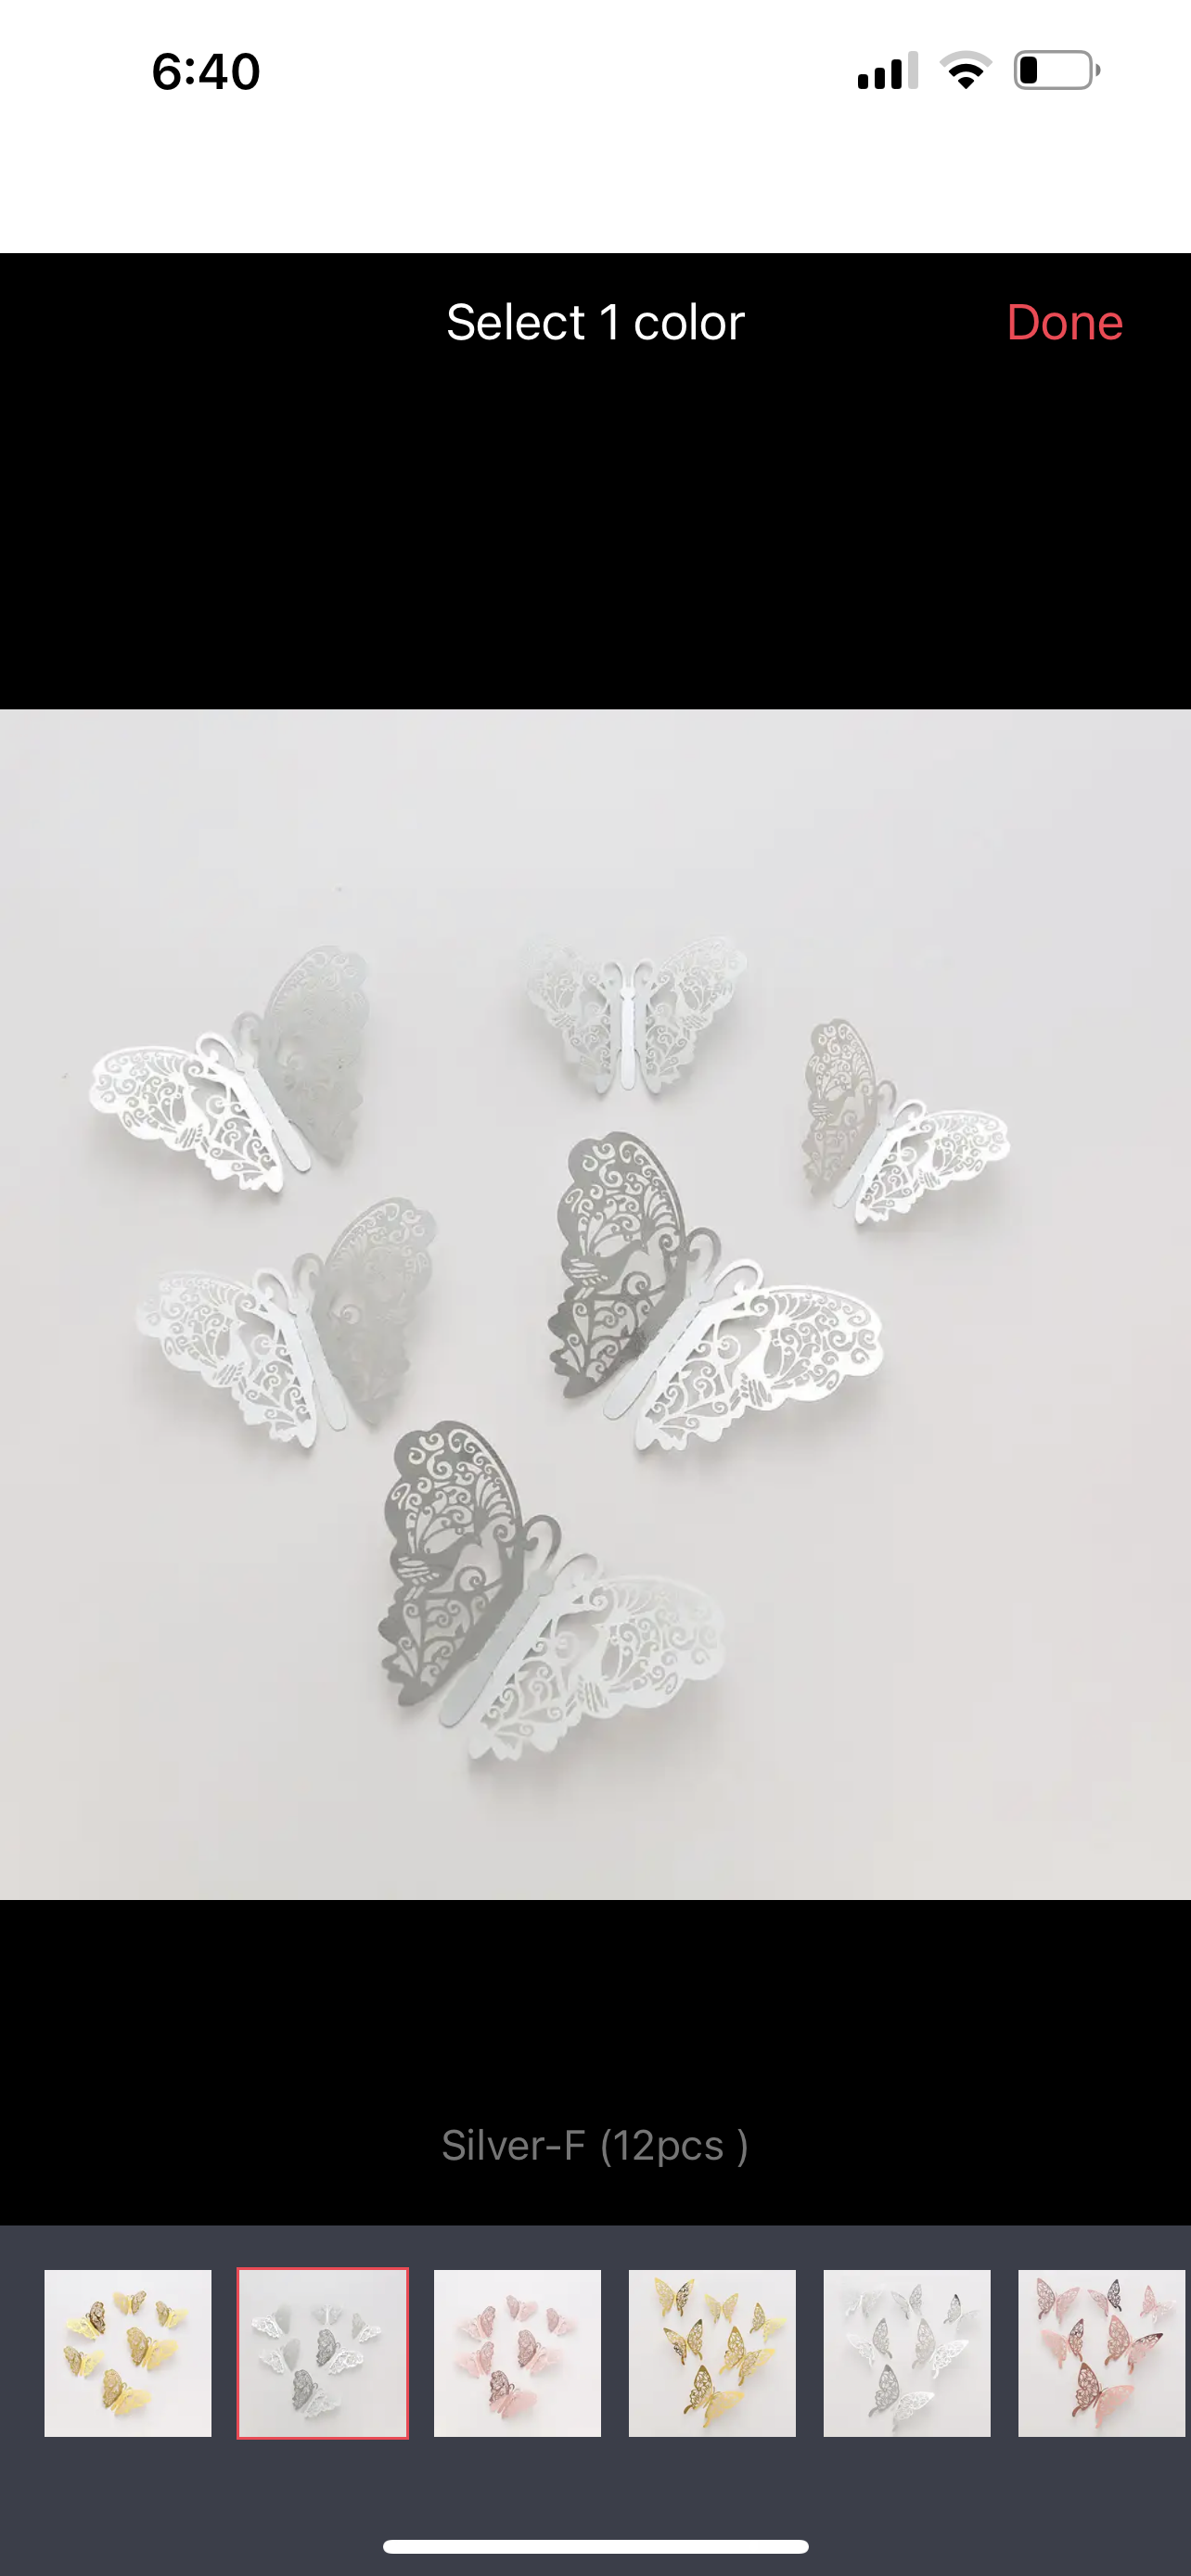 3D Butterflies & Happy Birtday Acrylic Cake Toppers